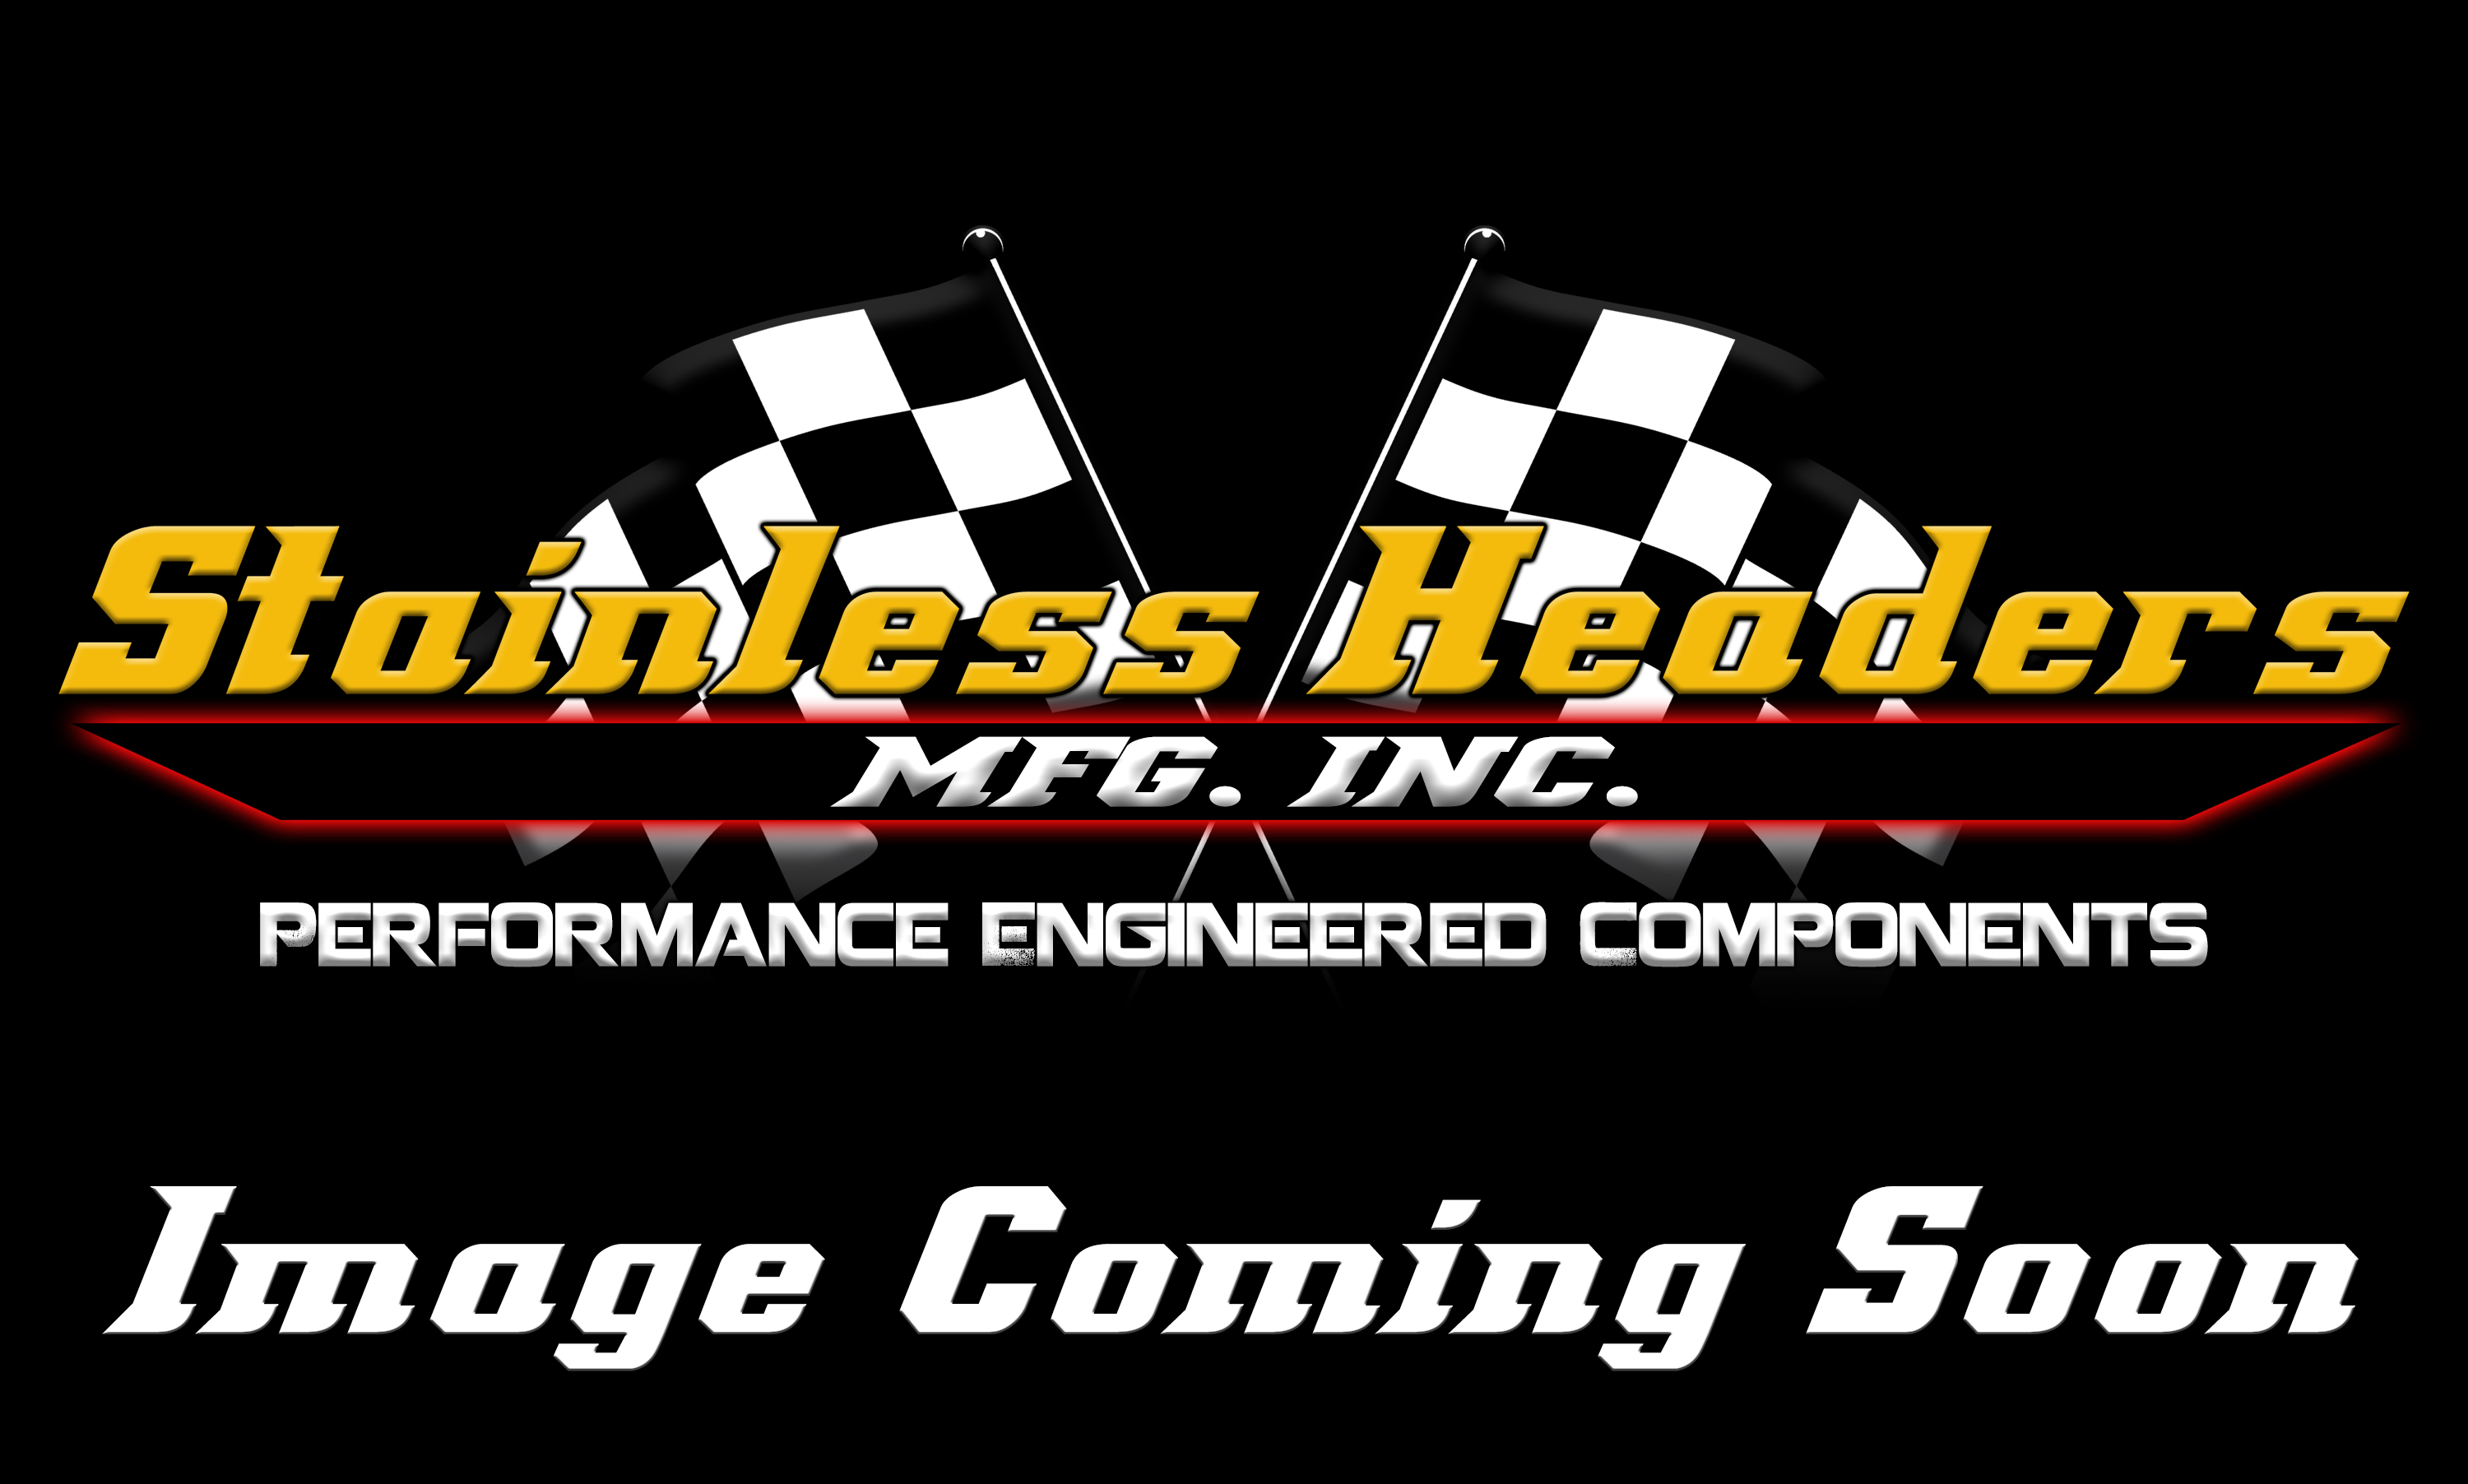 Stainless Headers - 1 1/2" Primary 2 into 1 Performance Merge Collector-16ga 304ss